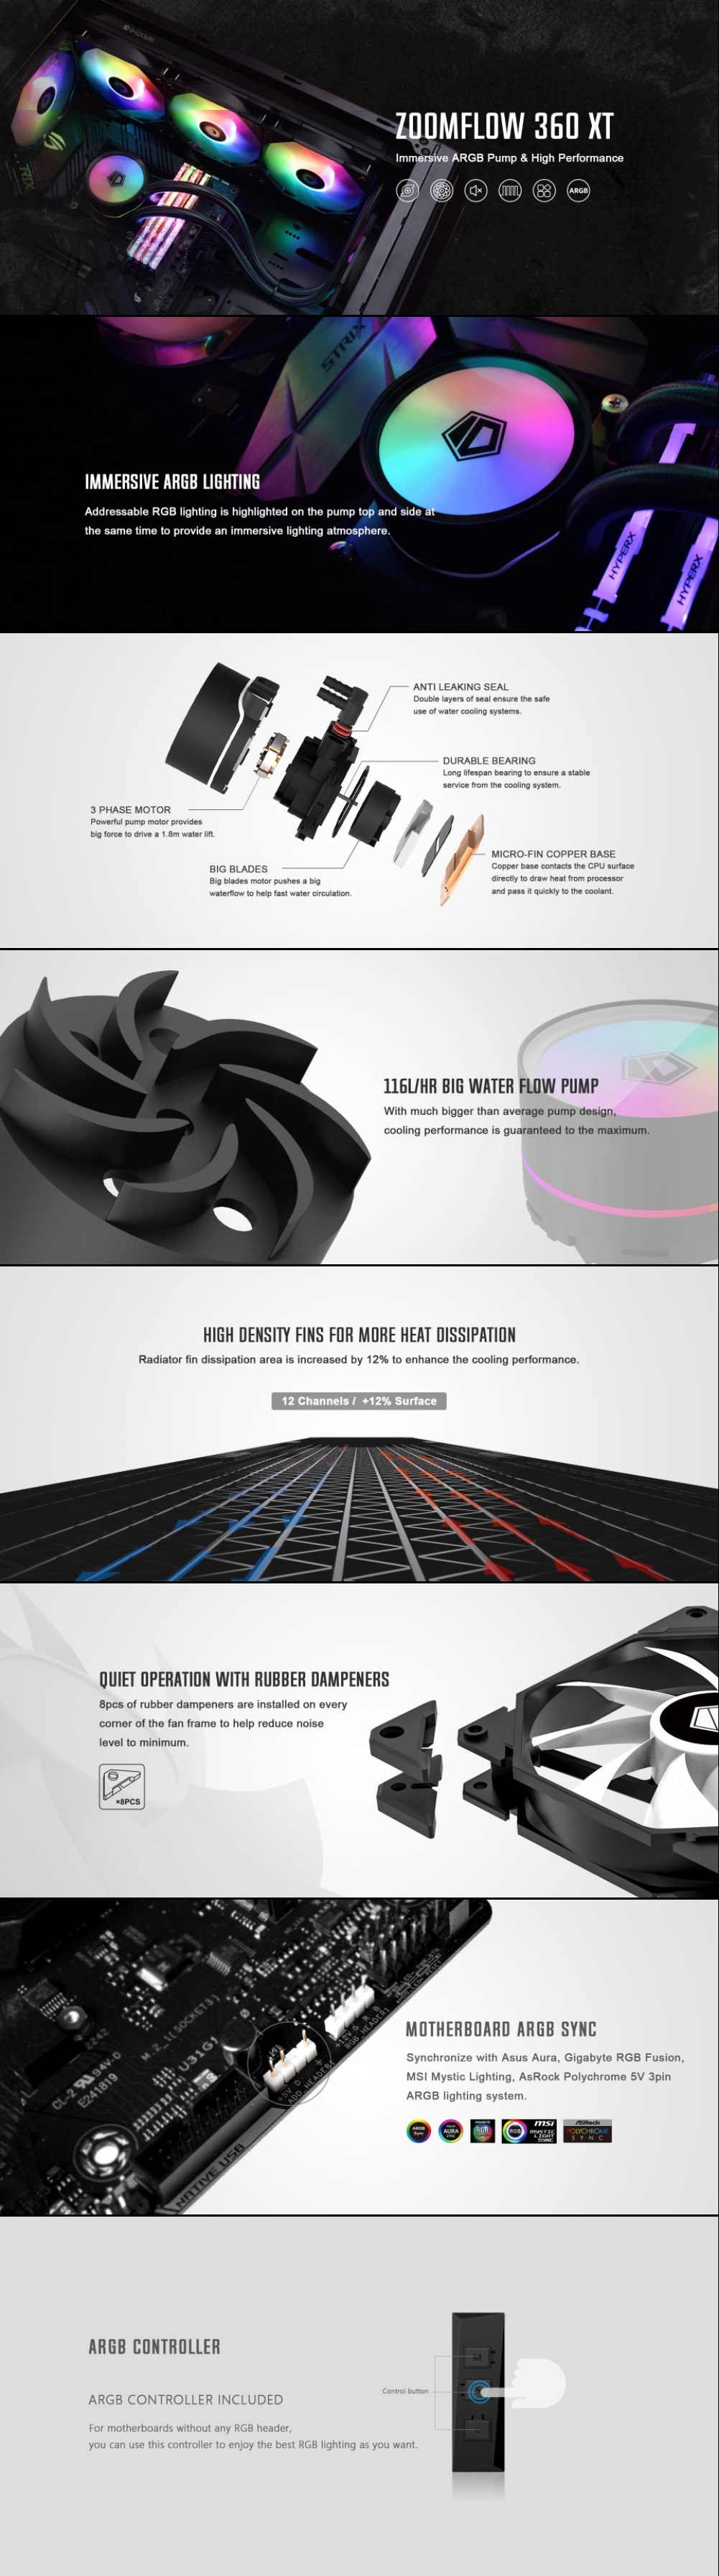 A large marketing image providing additional information about the product ID-COOLING ZoomFlow 360 XT 360mm ARGB AIO CPU Liquid Cooler - Additional alt info not provided